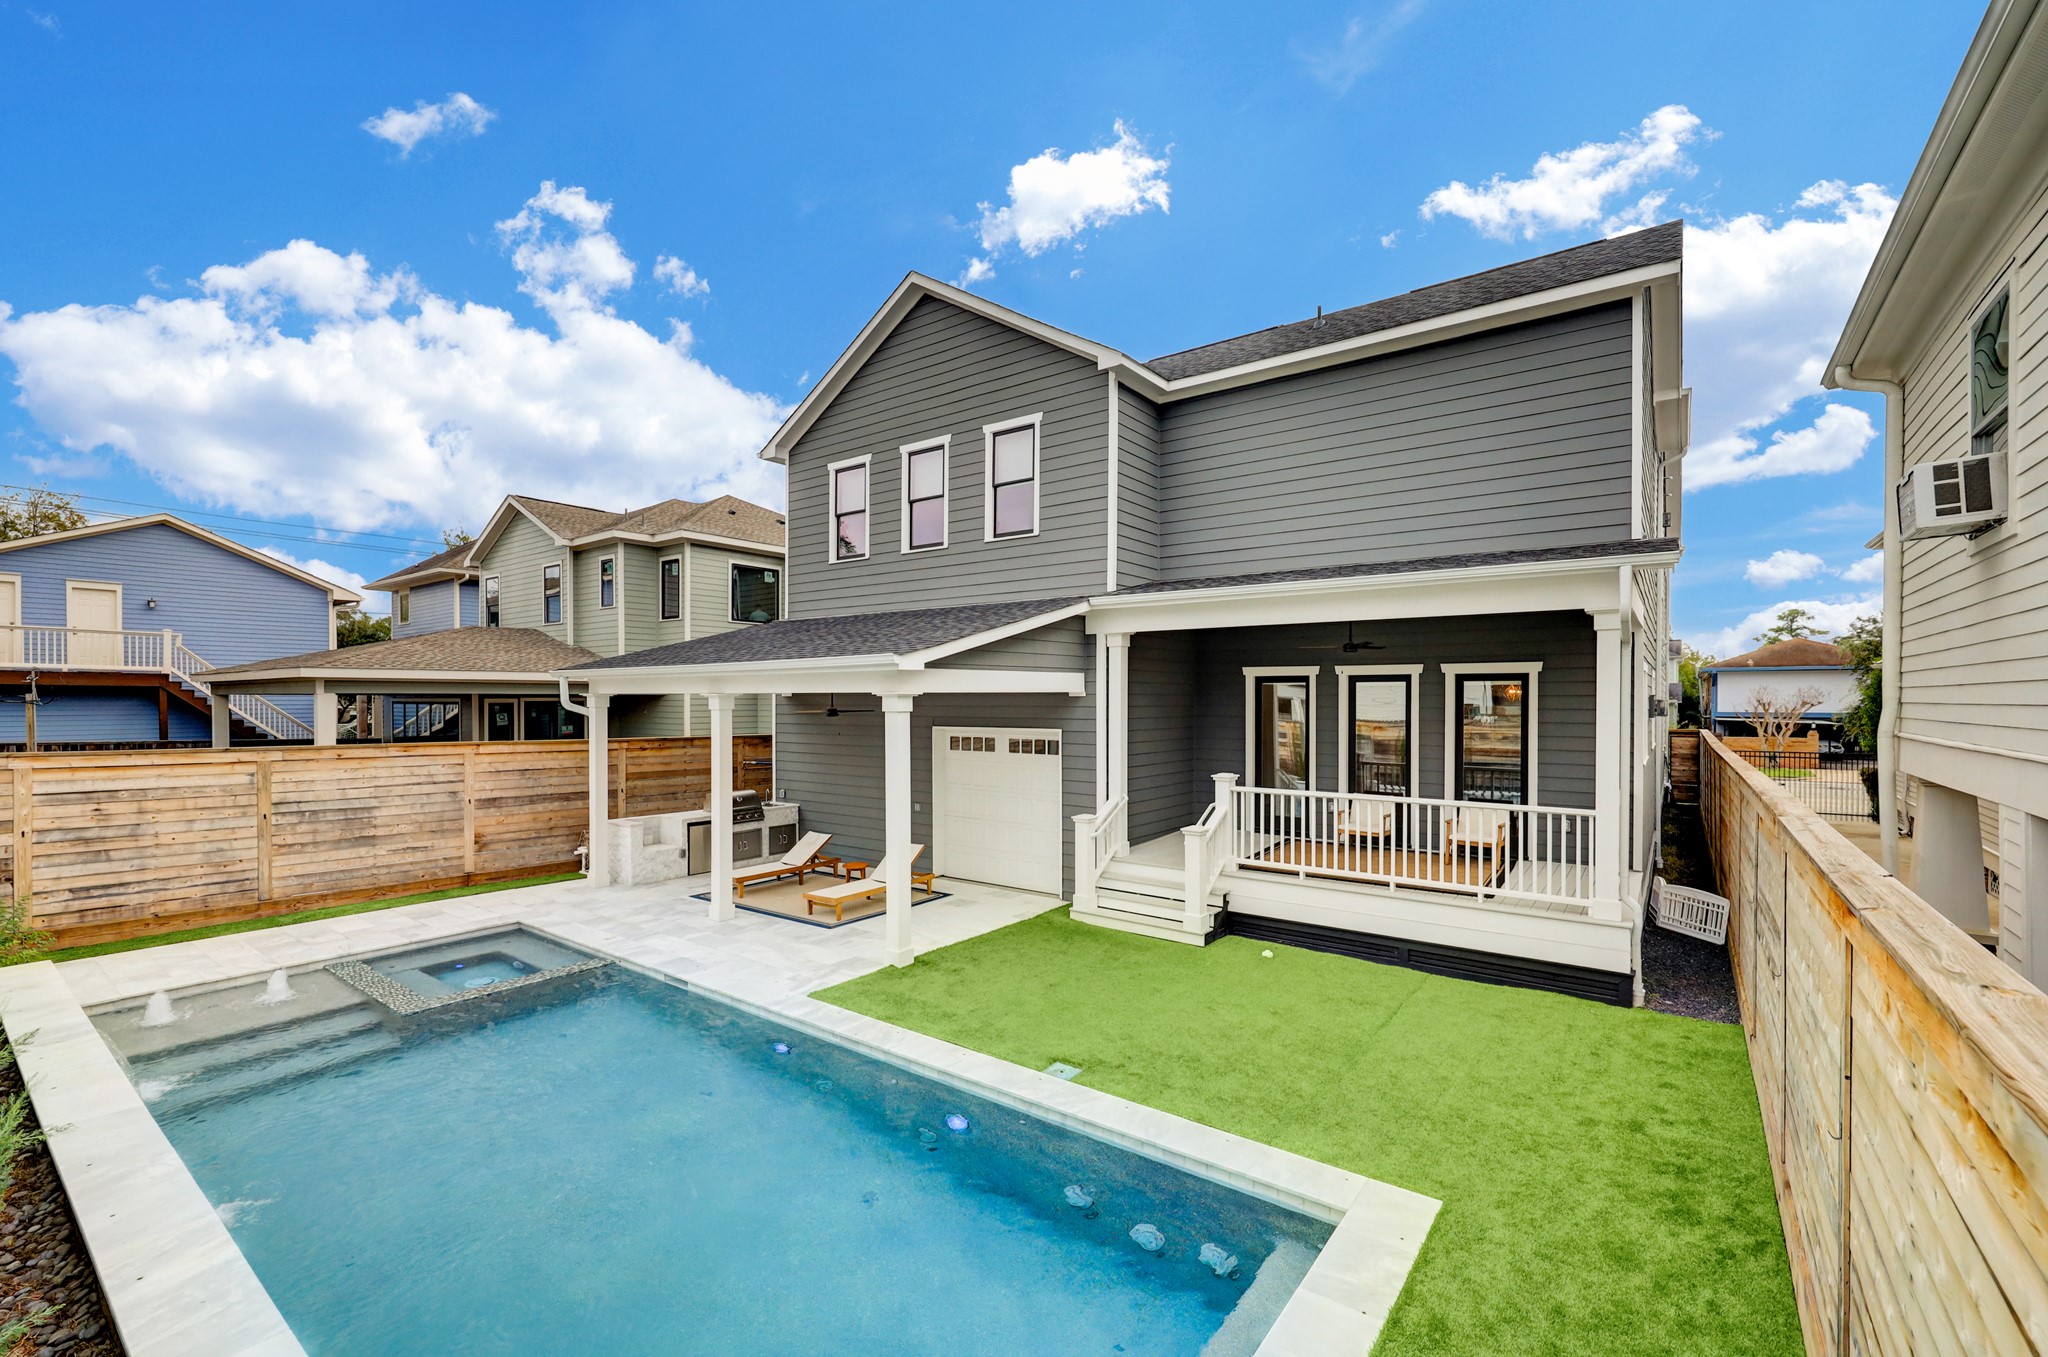 The 35-foot by 14-foot sparking swimming pool beckons with water features and an extra-large spa. Complete outdoor kitchen and second garage door provides additional arrangements and convenience for parties and gatherings.